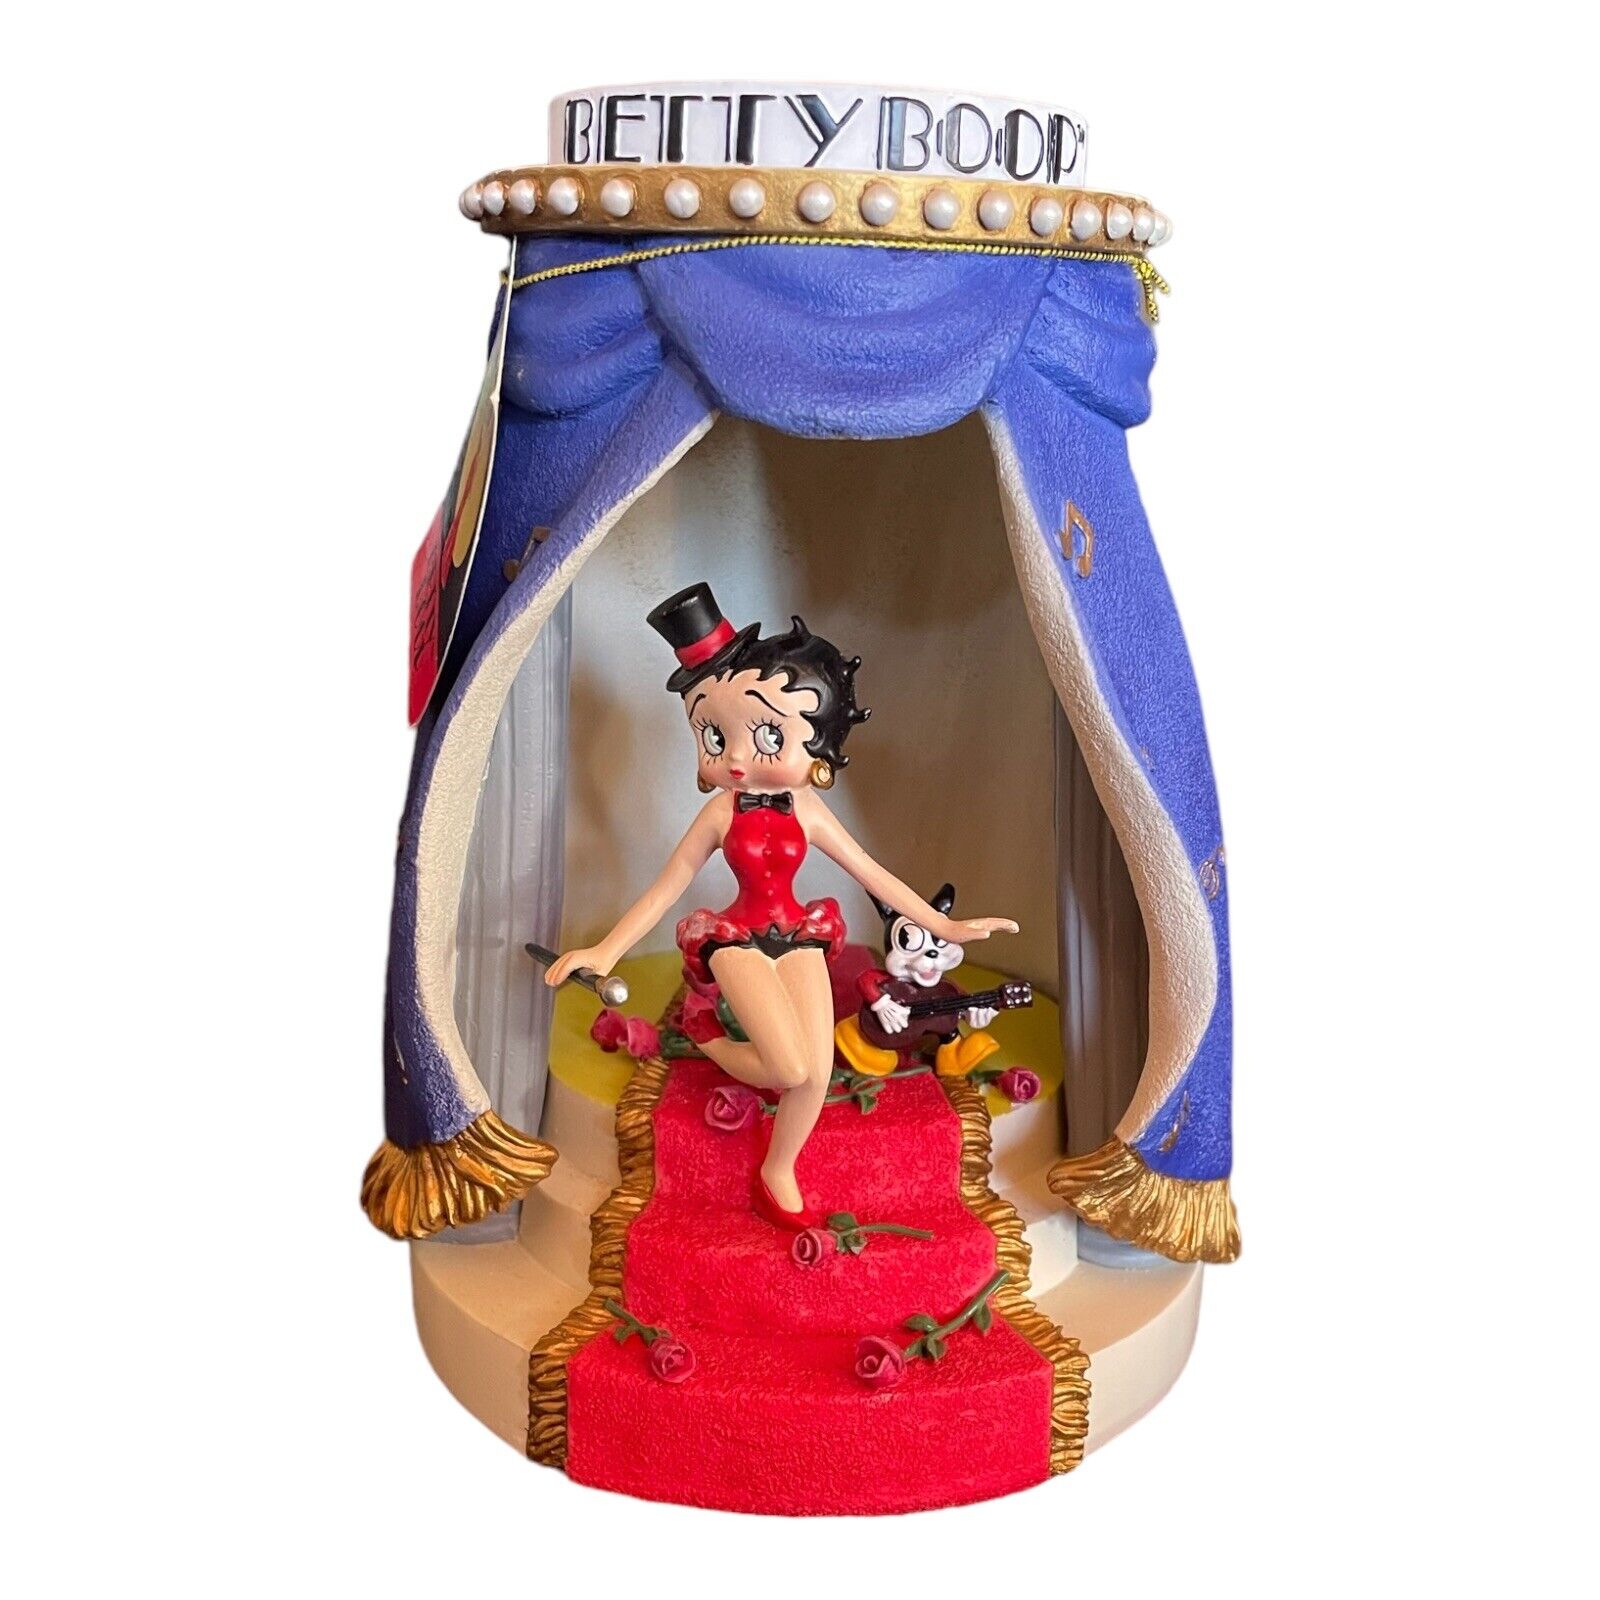 VTG BETTY BOOP Bimbo On Stage MusicBox Figure Curtain Westland Giftware 2001 Y2K